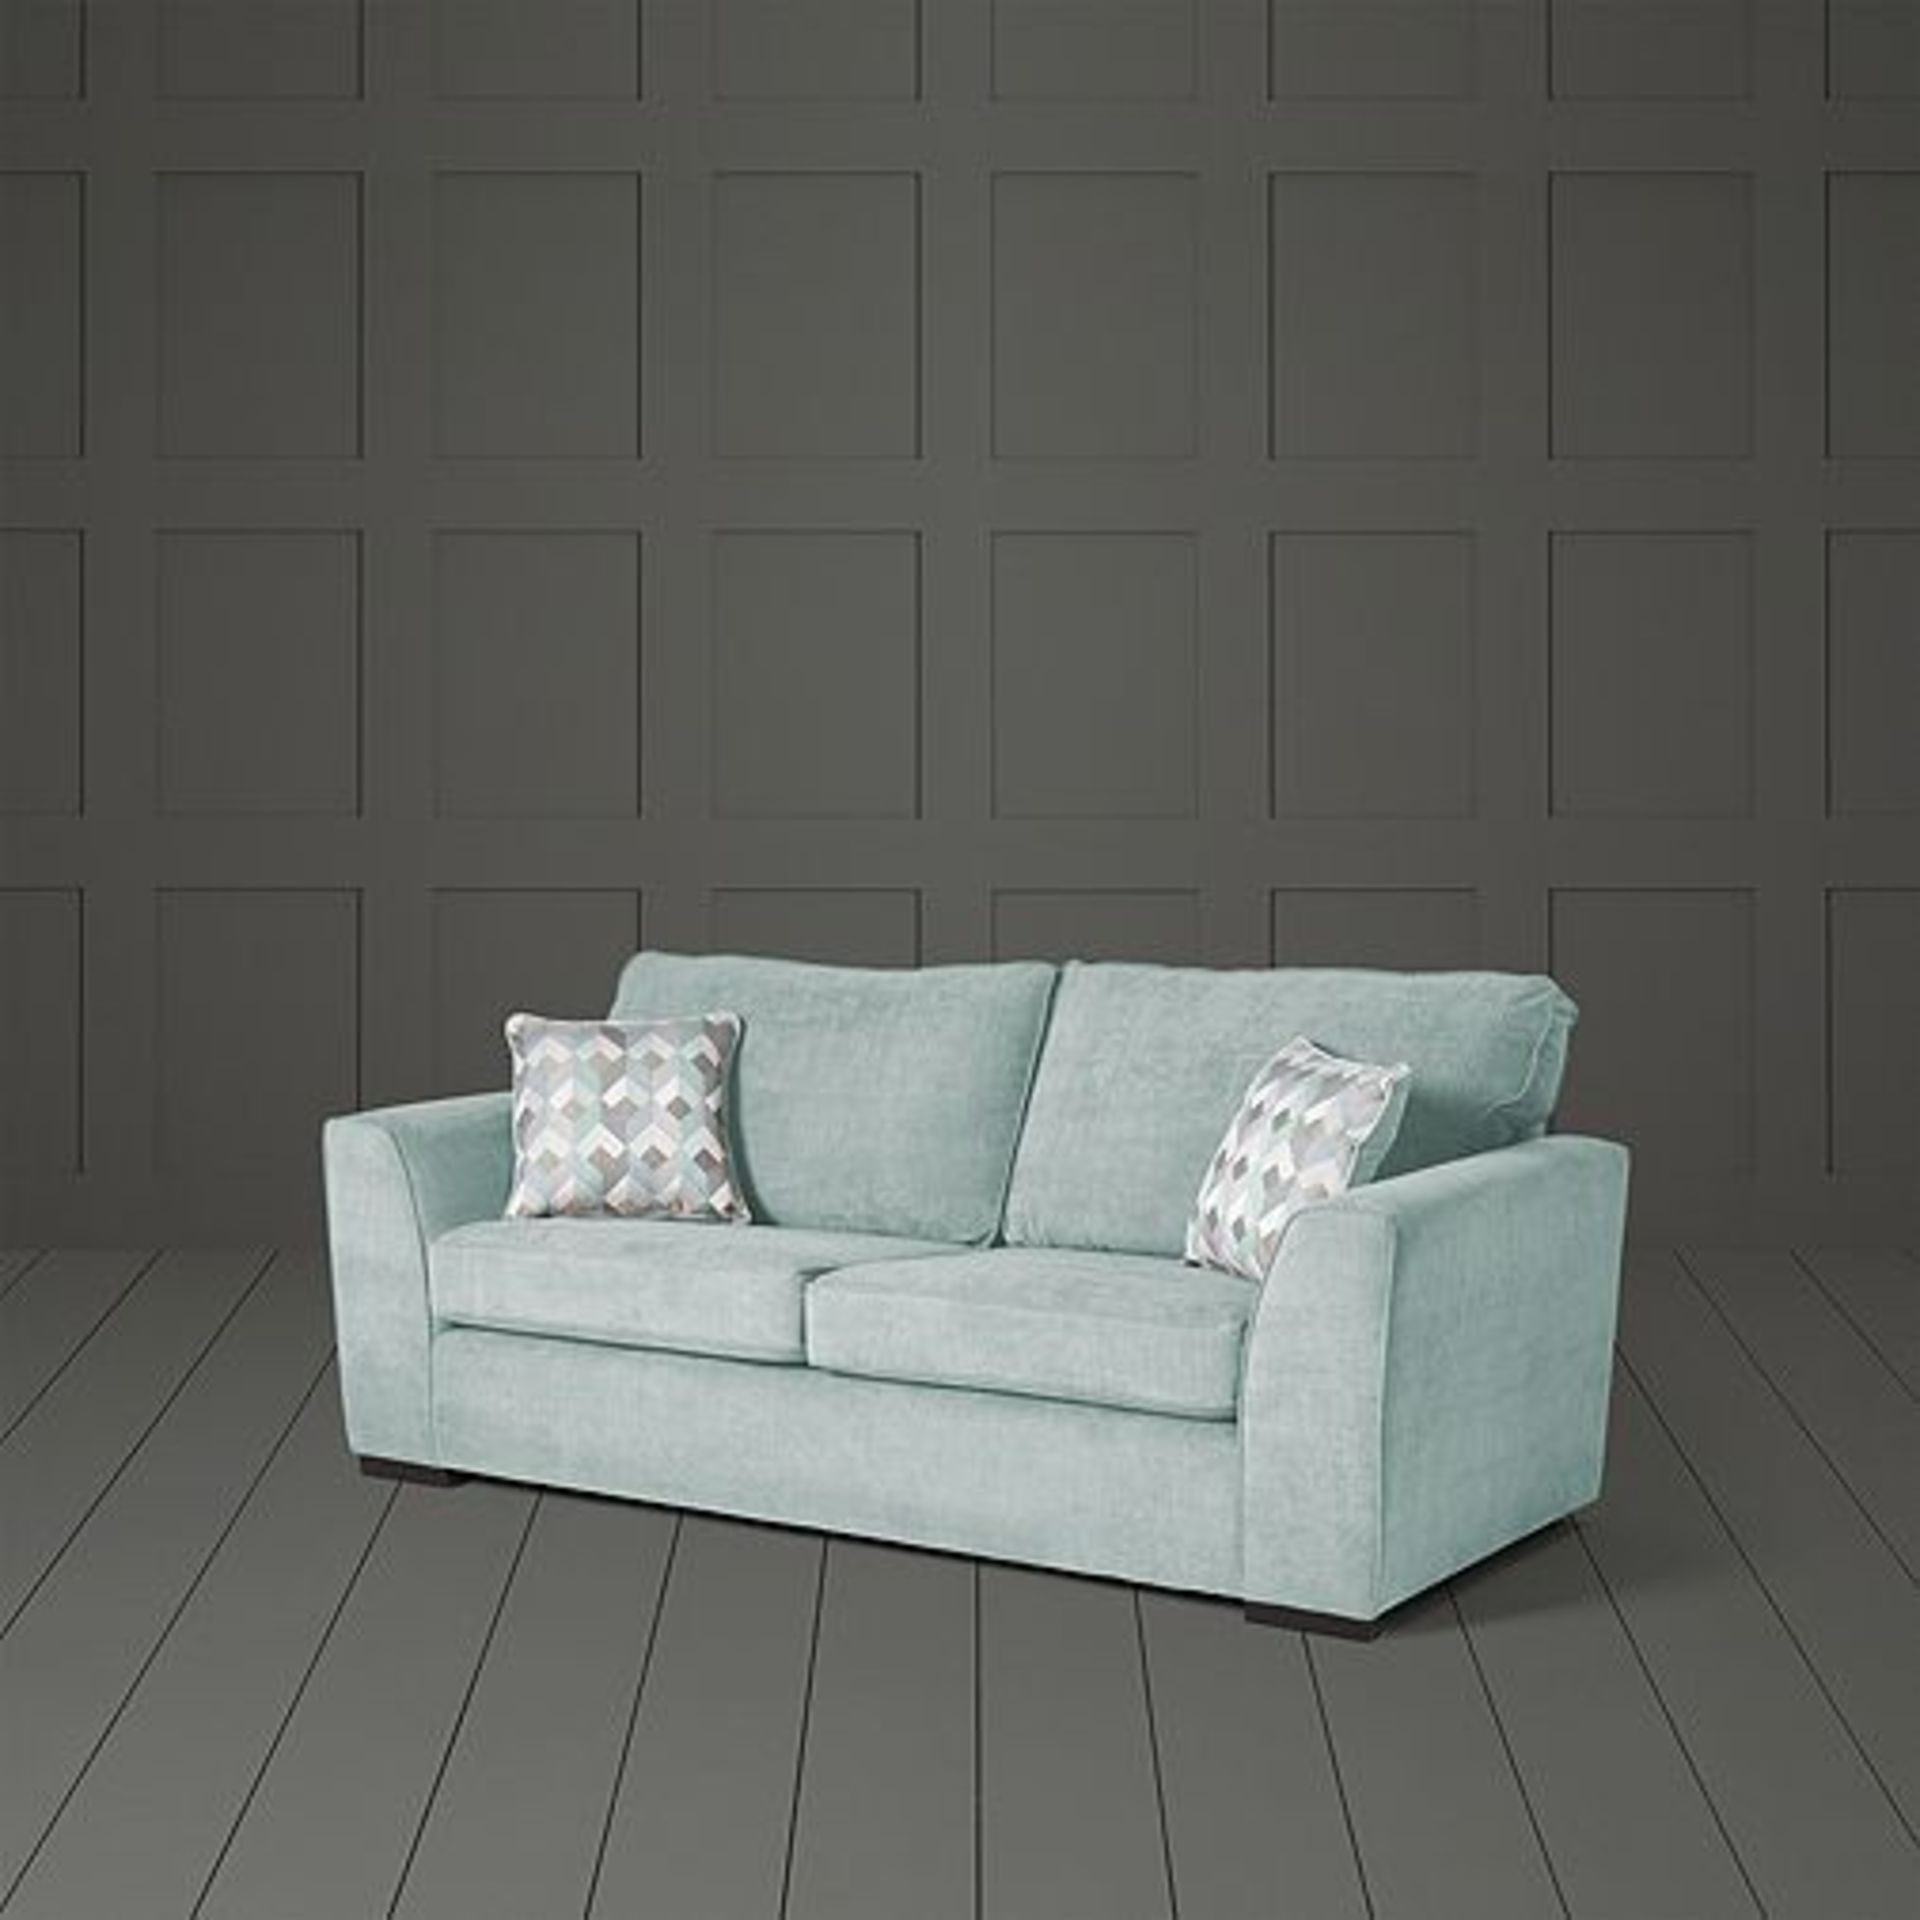 1 BRAND NEW BAGGED BOSTON LARGE 3 SEATER SOFA IN DUCK EGG / 42592 (VIEWING HIGHLY RECOMMENDED)